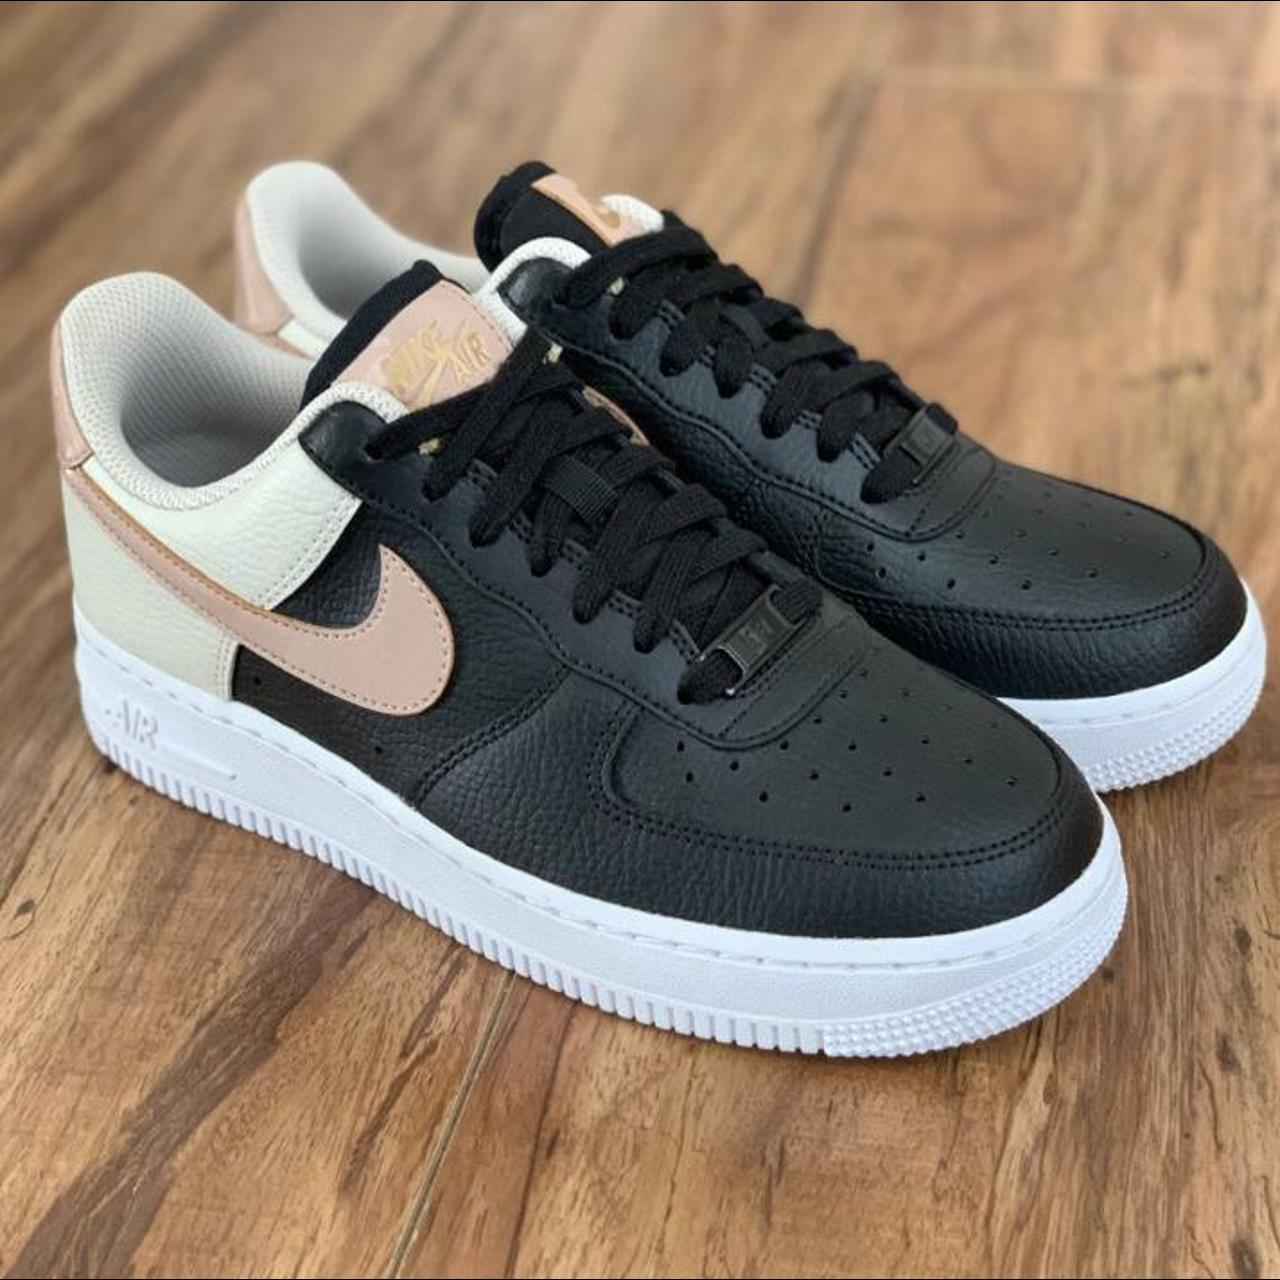 Product Image 1 - Size 7 women’s
Nike Air Force